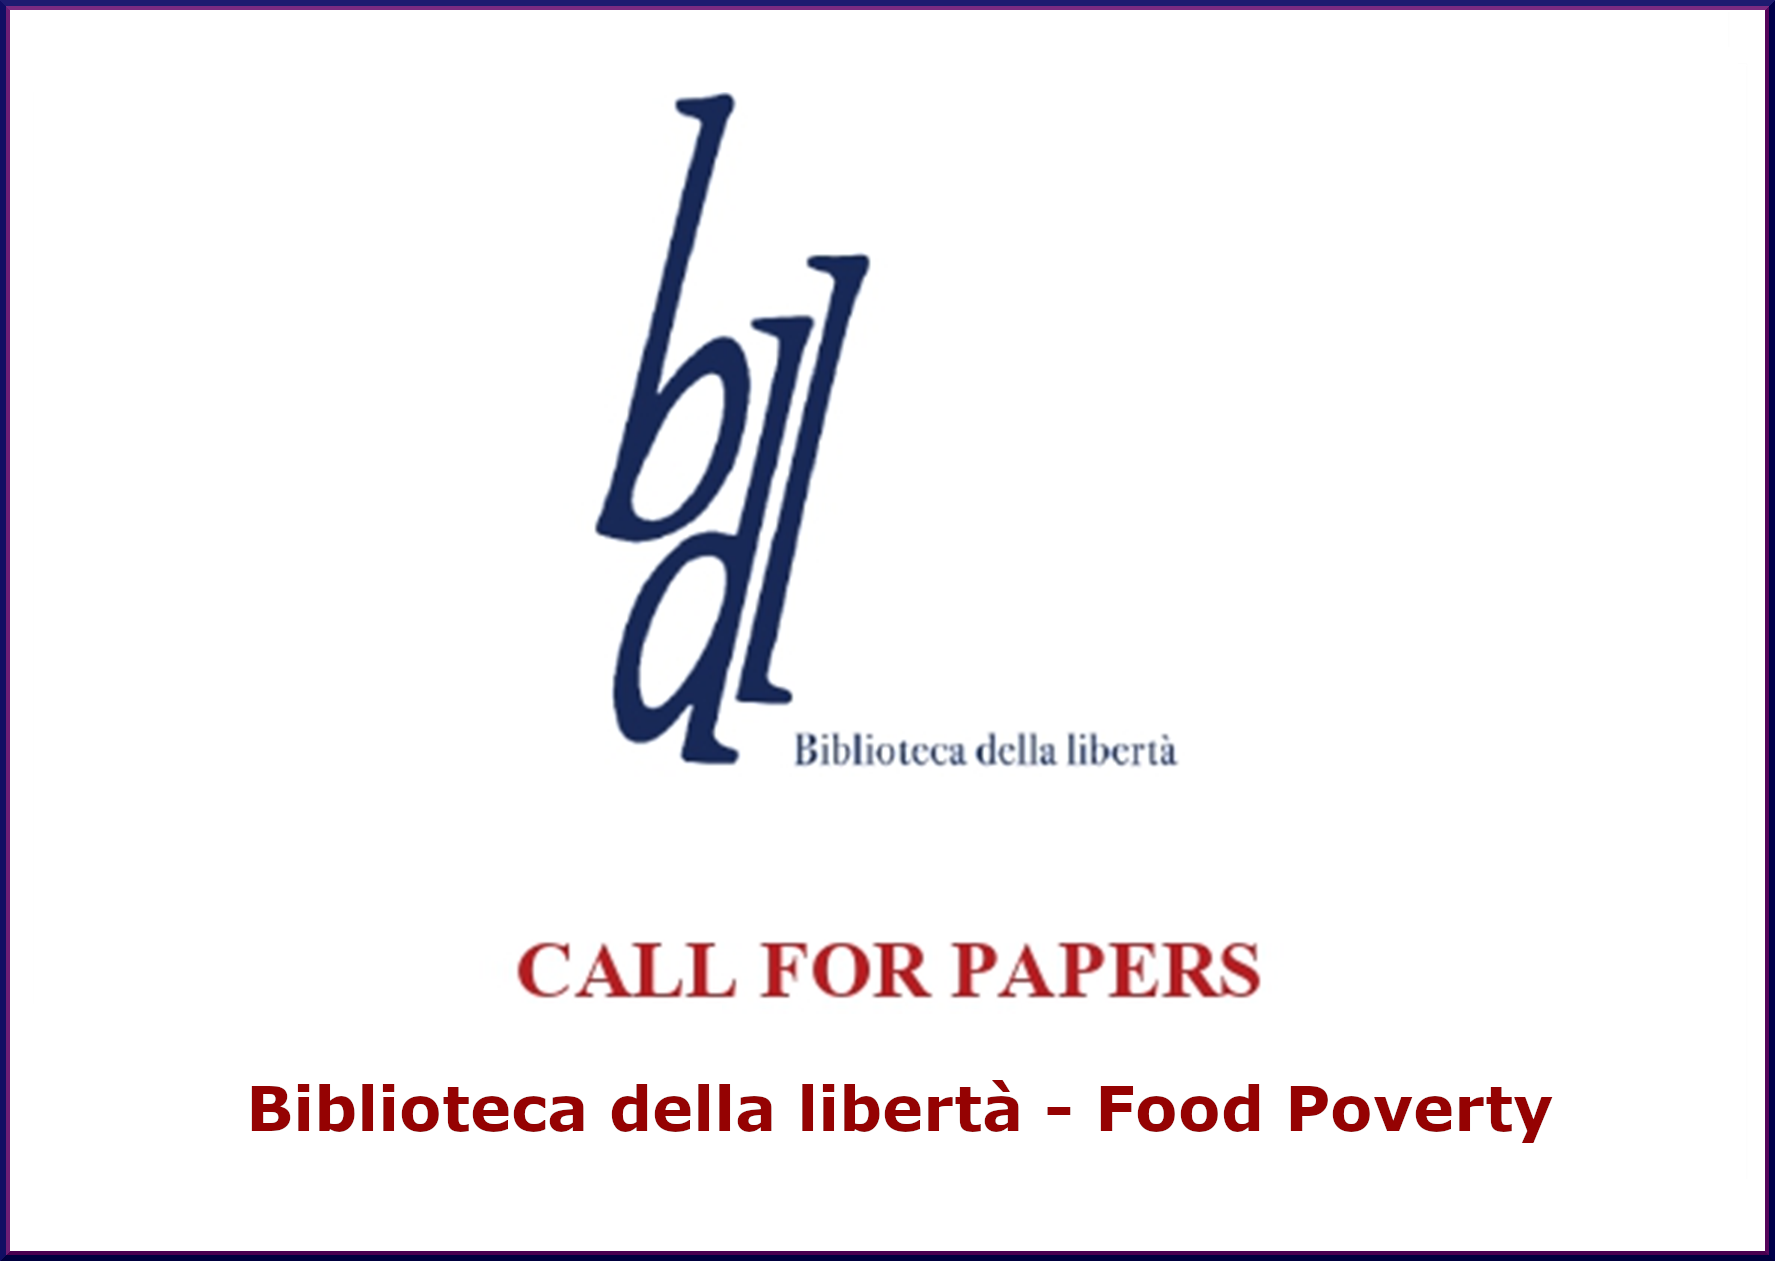 Food poverty, sustainability and right to food: CALL IN CHIUSURA